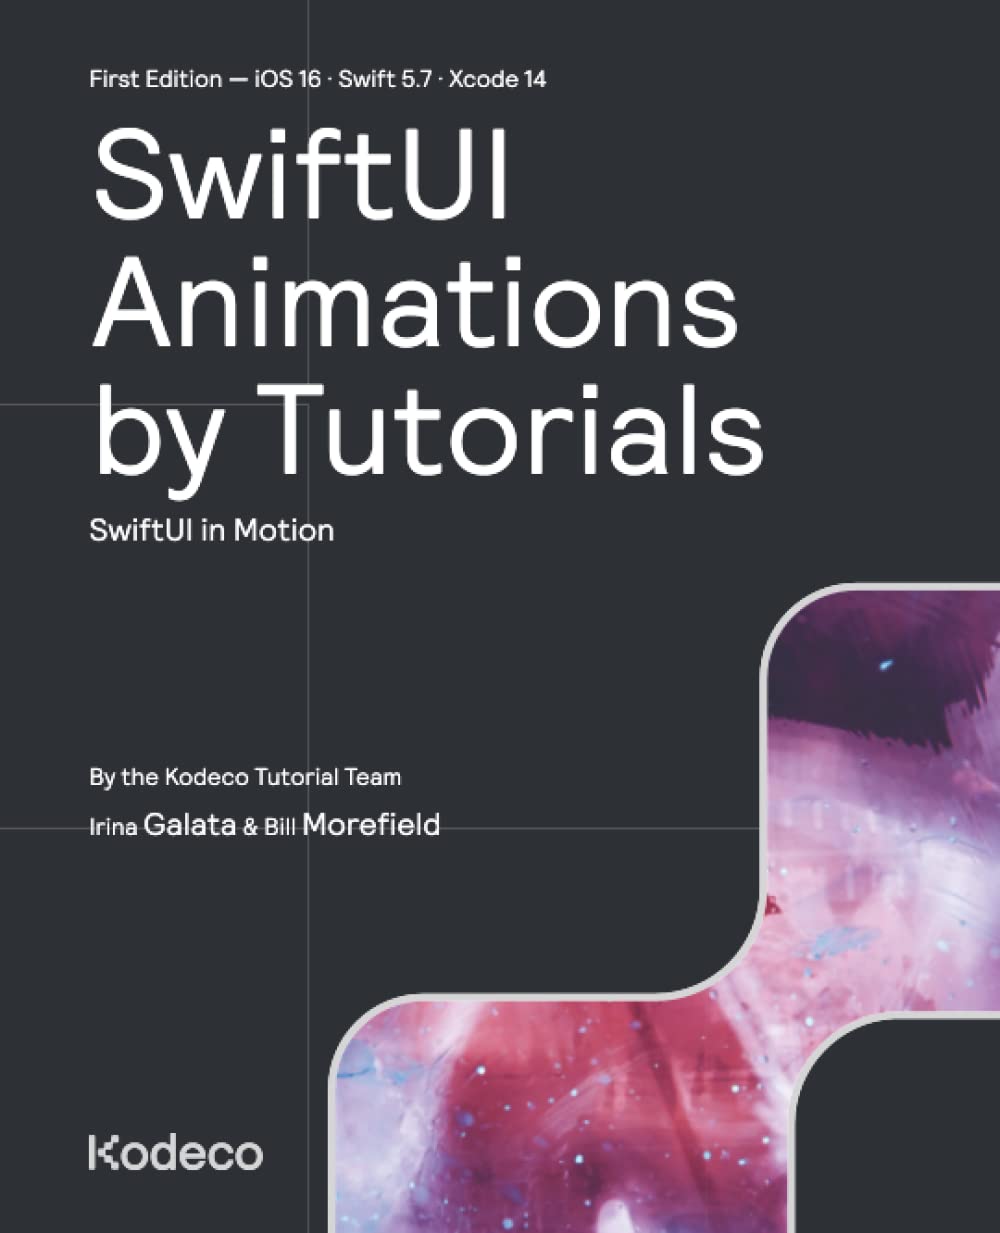 (EBook PDF)SwiftUI Animations by Tutorials (First Edition): SwiftUI in Motion by Kodeco Tutorial Team, Irina Galata, Bill Morefield